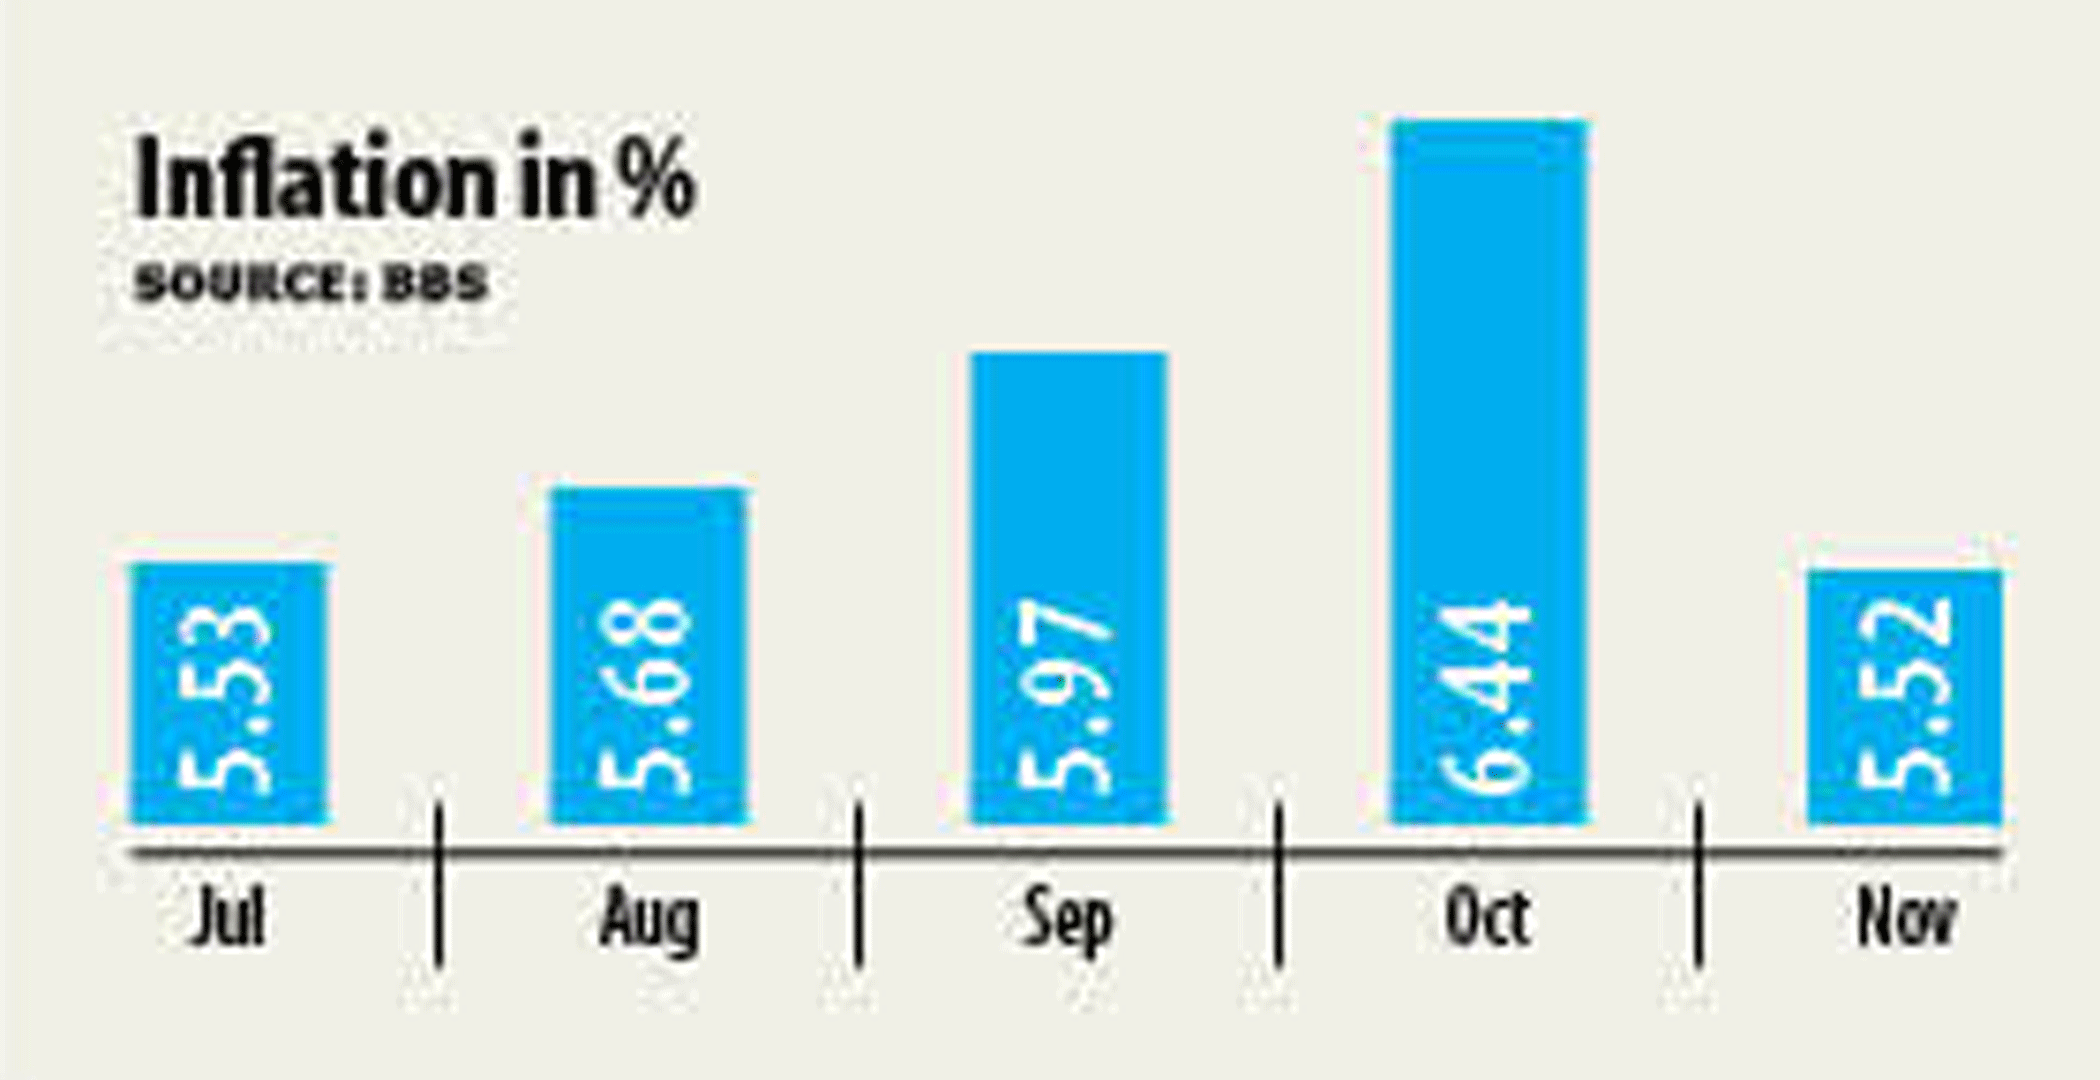 Inflation cools off found in Nov